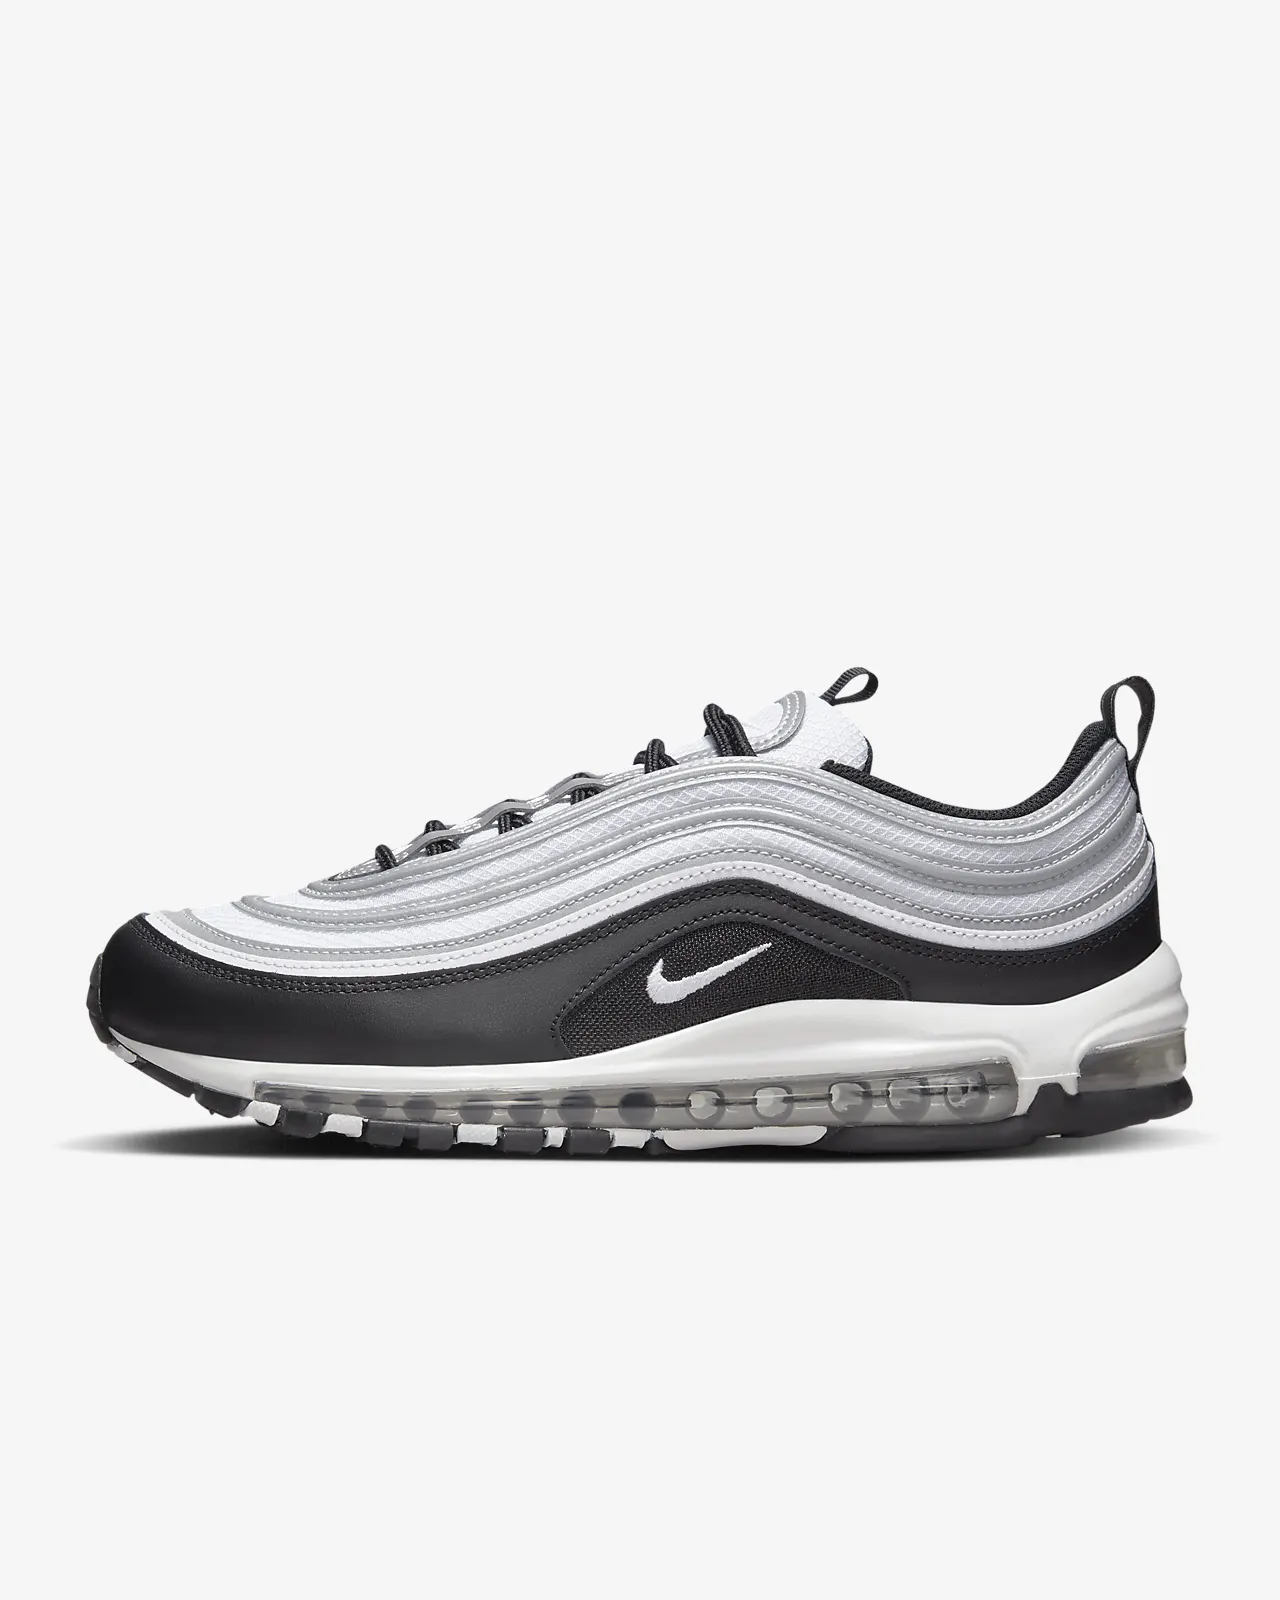 How To Clean Nike Air Max 97 - DO THIS!